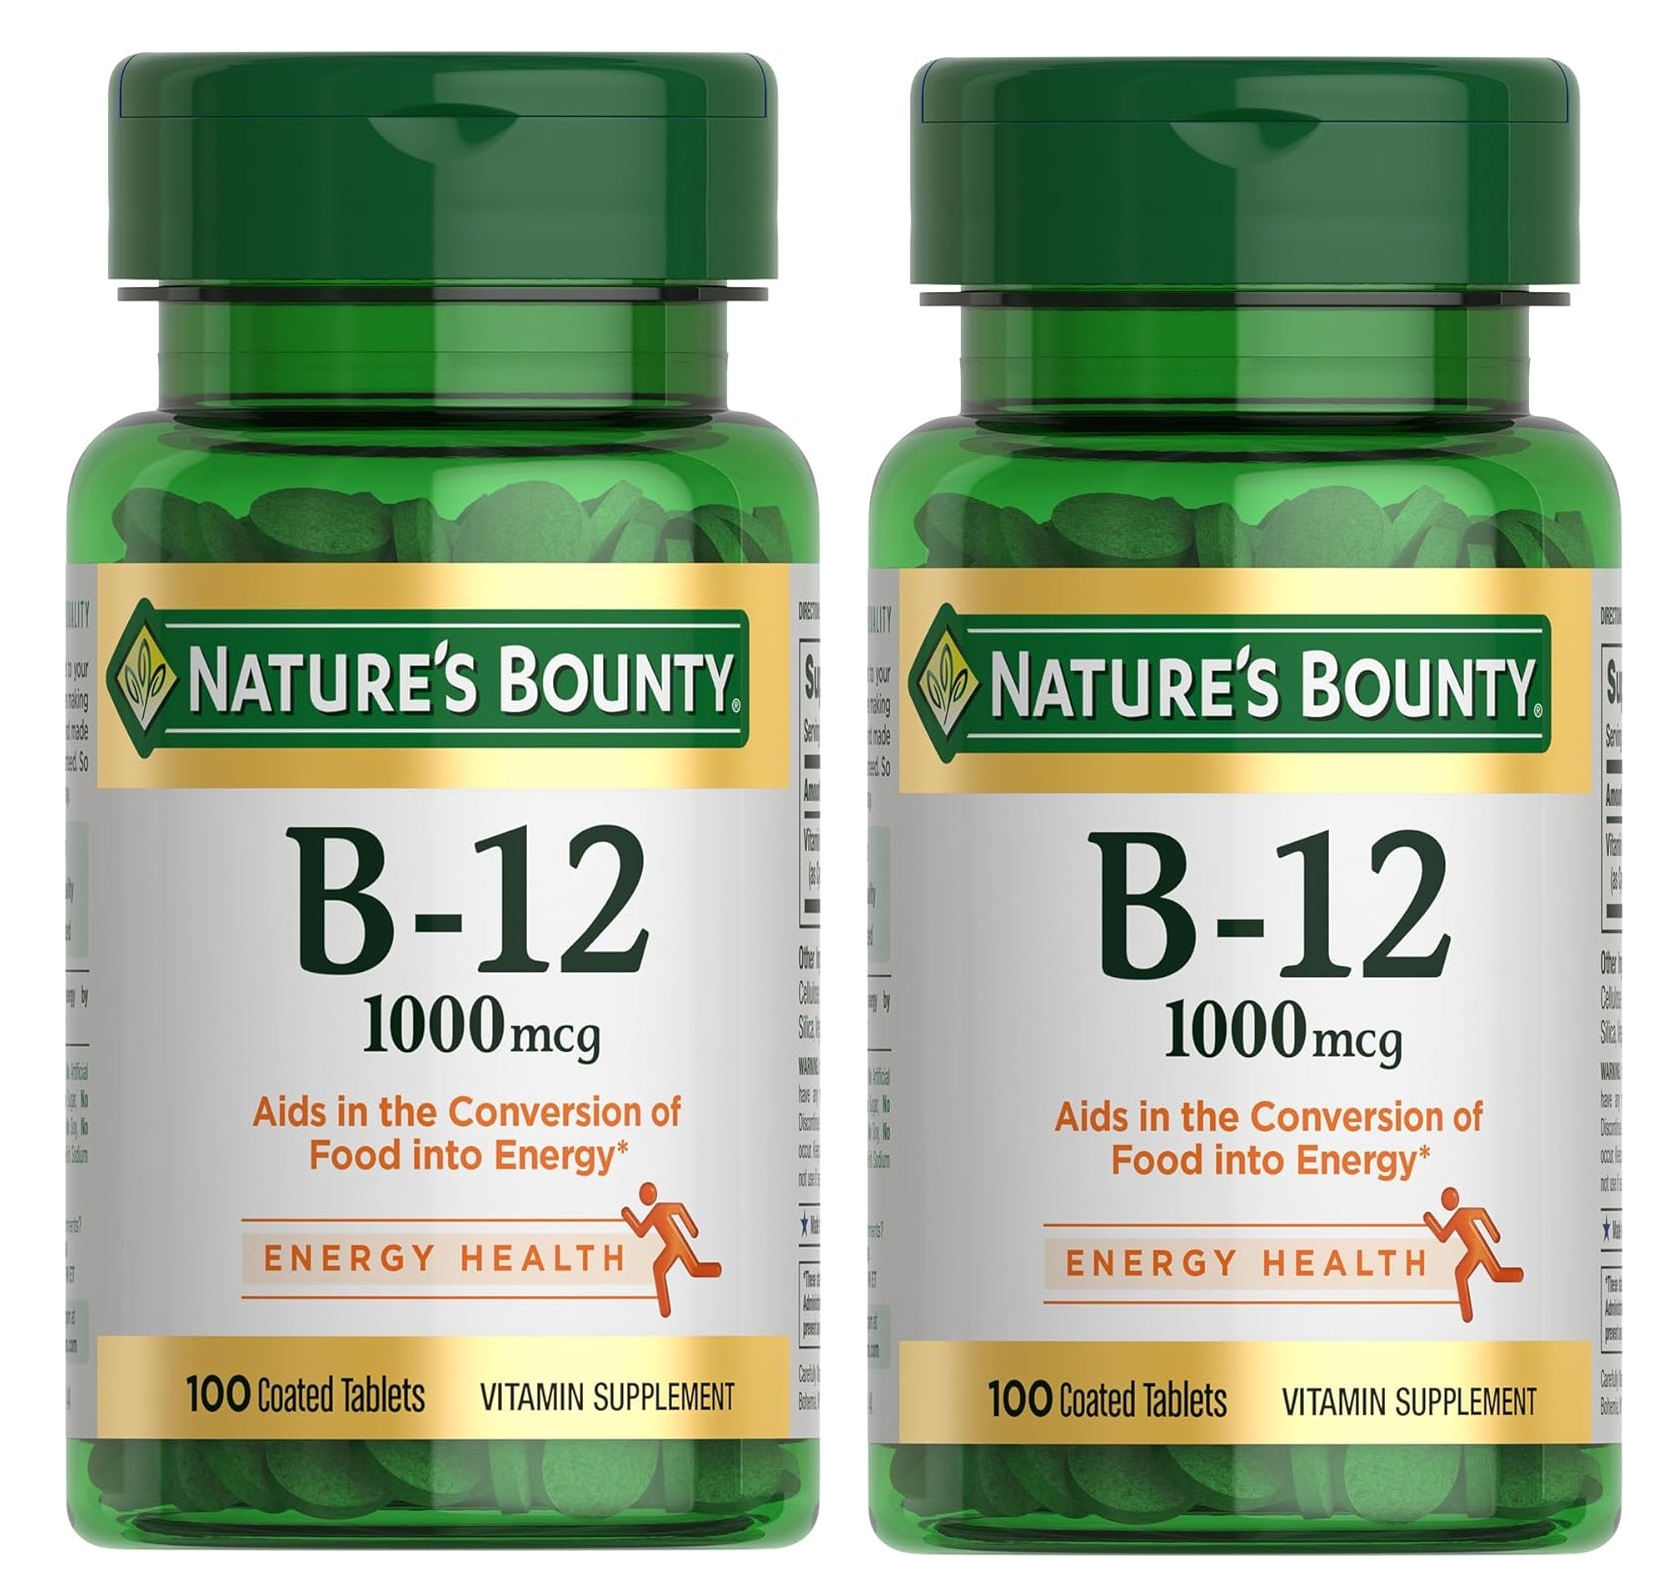 Nature's Bounty Vitamins & Supplements: Buy 1 Get 1 Free: 100-Ct Vitamin B12 2 for $6.10 & More